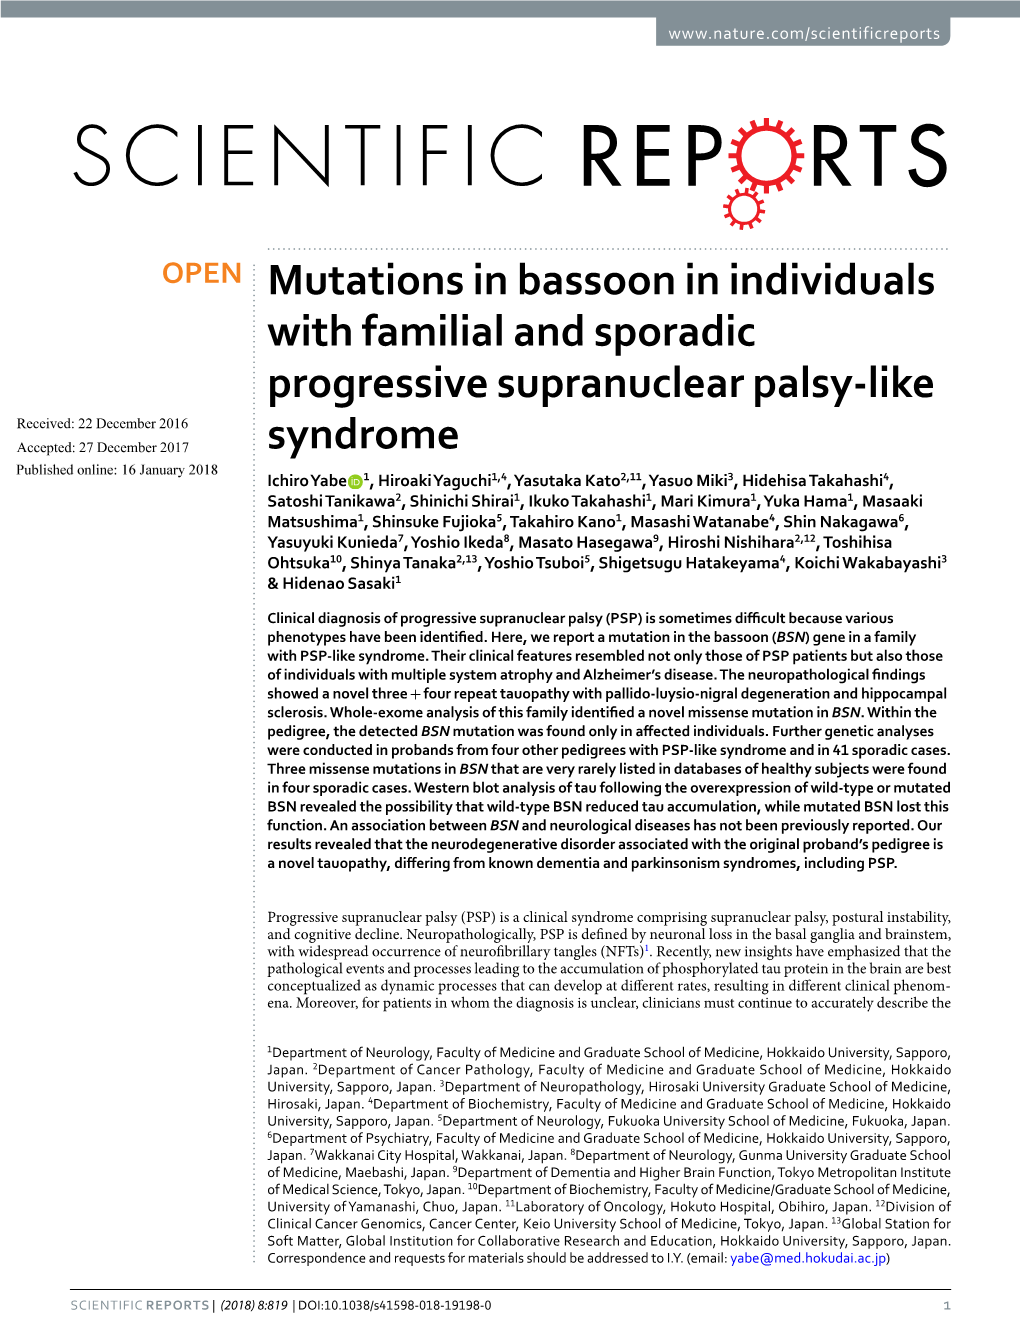 Mutations in Bassoon in Individuals with Familial and Sporadic